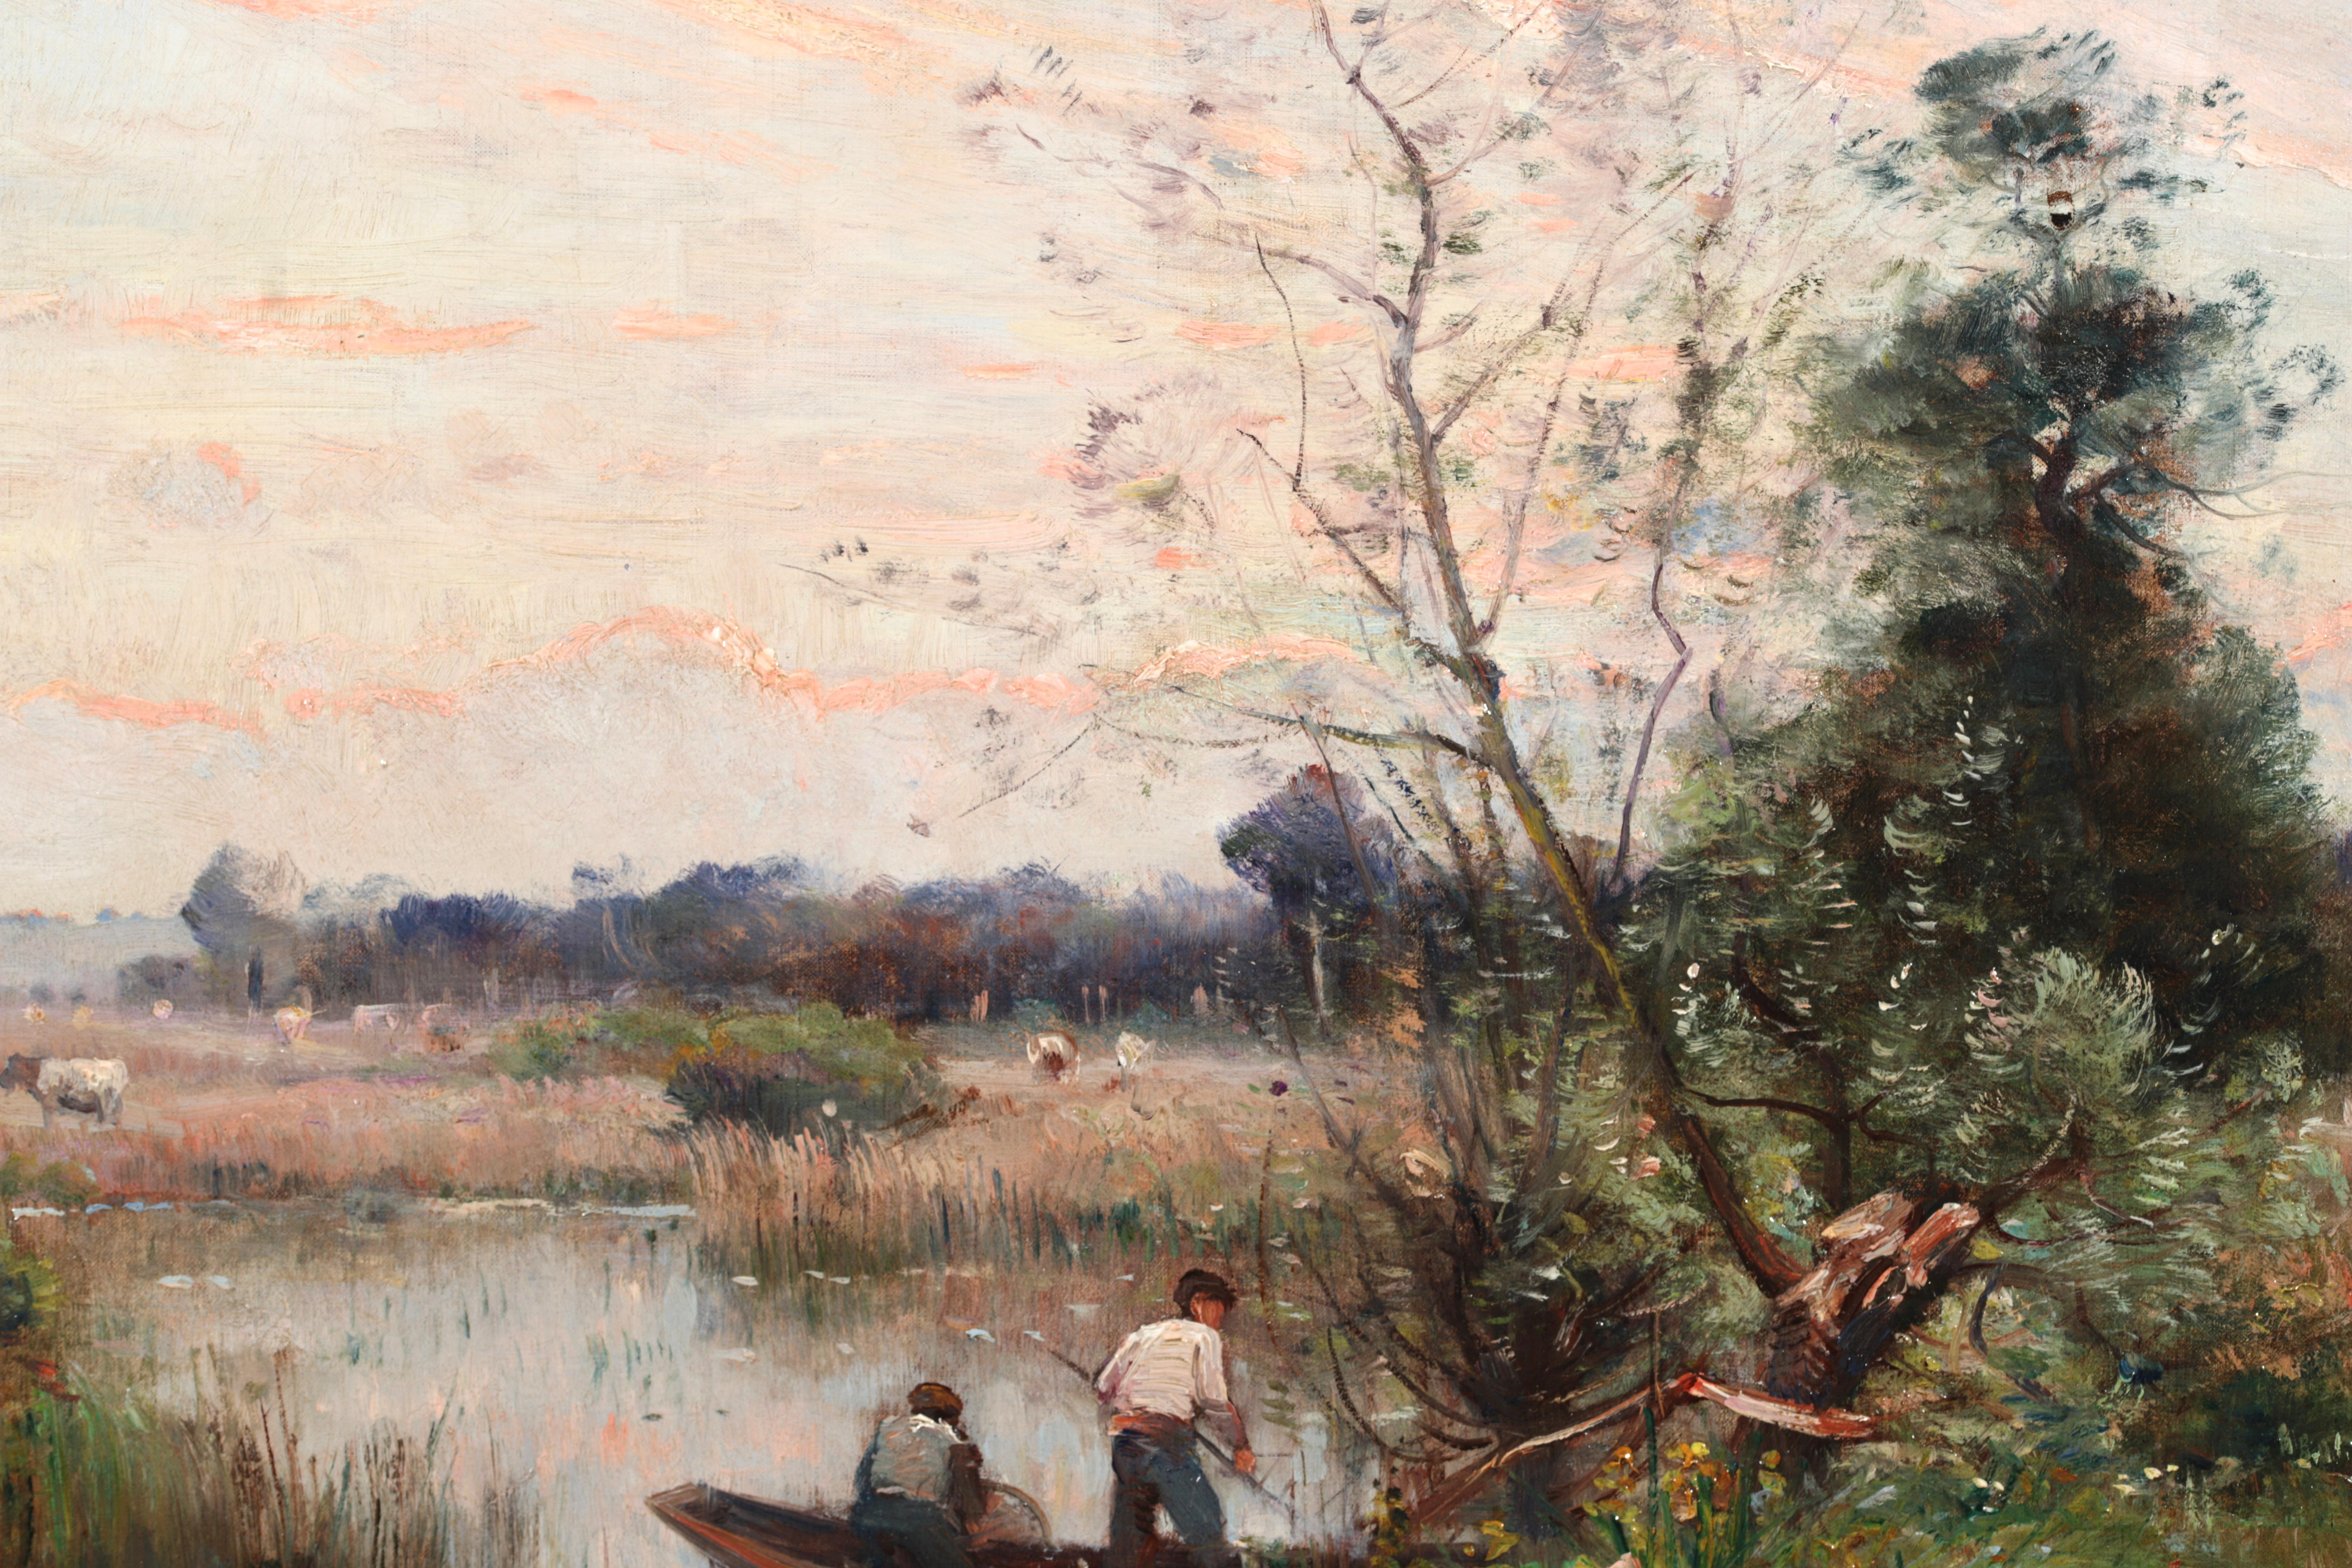 Fishing on a River - Impressionist Oil, Boat on River Landscape by Louis Japy 1